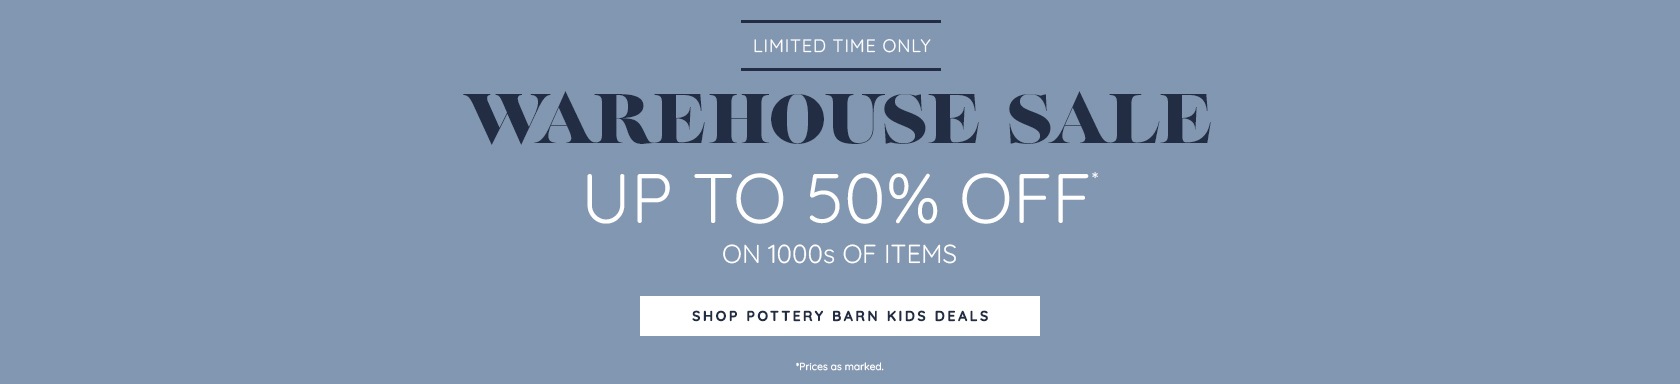 Warehouse Sale: Up to 50% Off